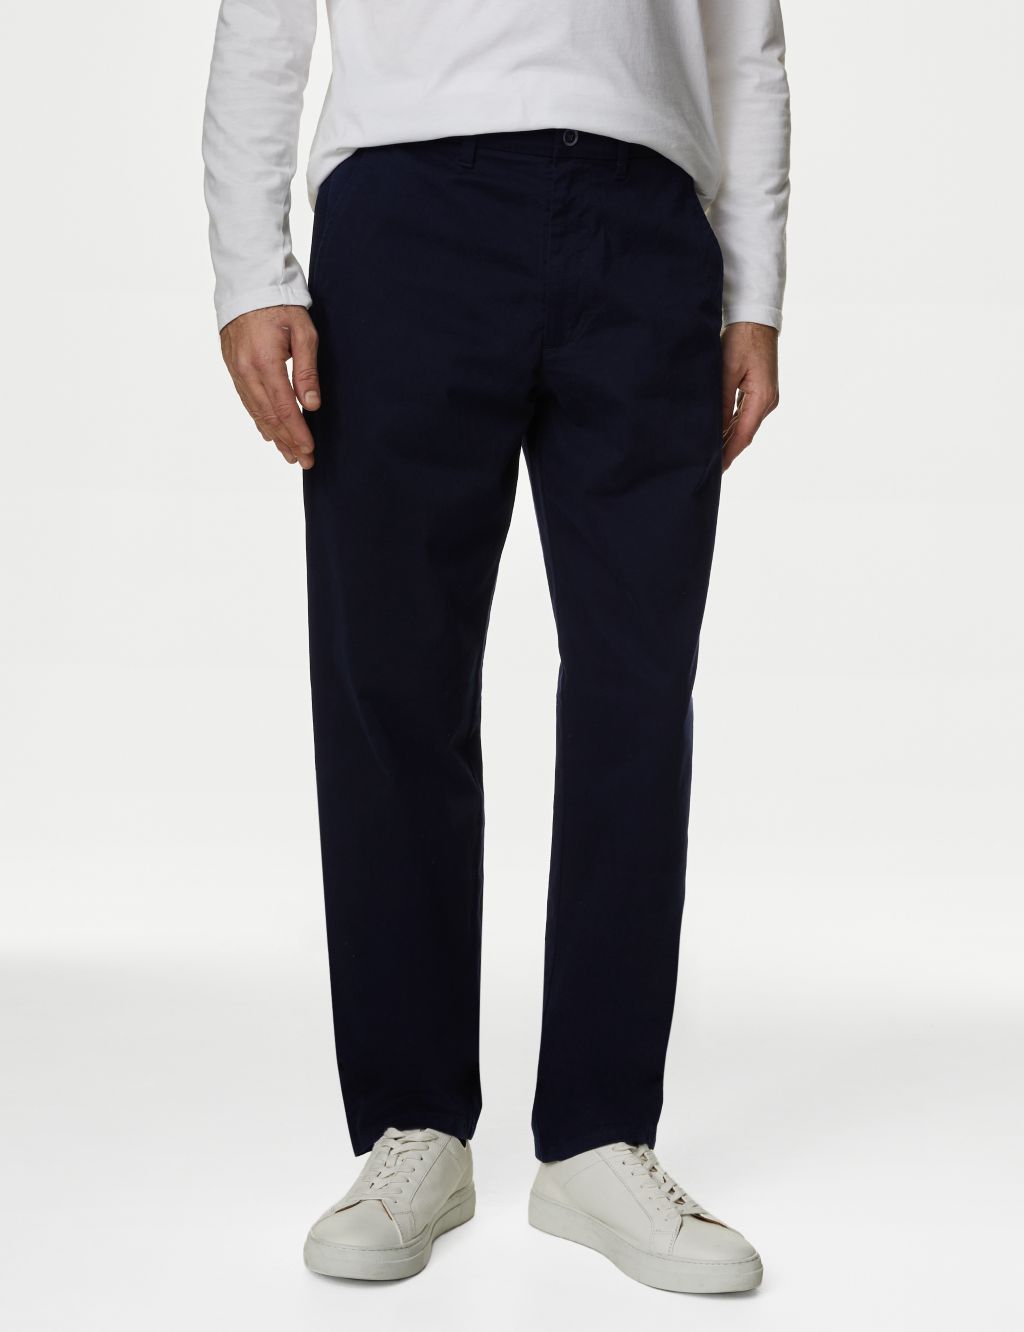 Loose Fit Stretch Chinos image 1